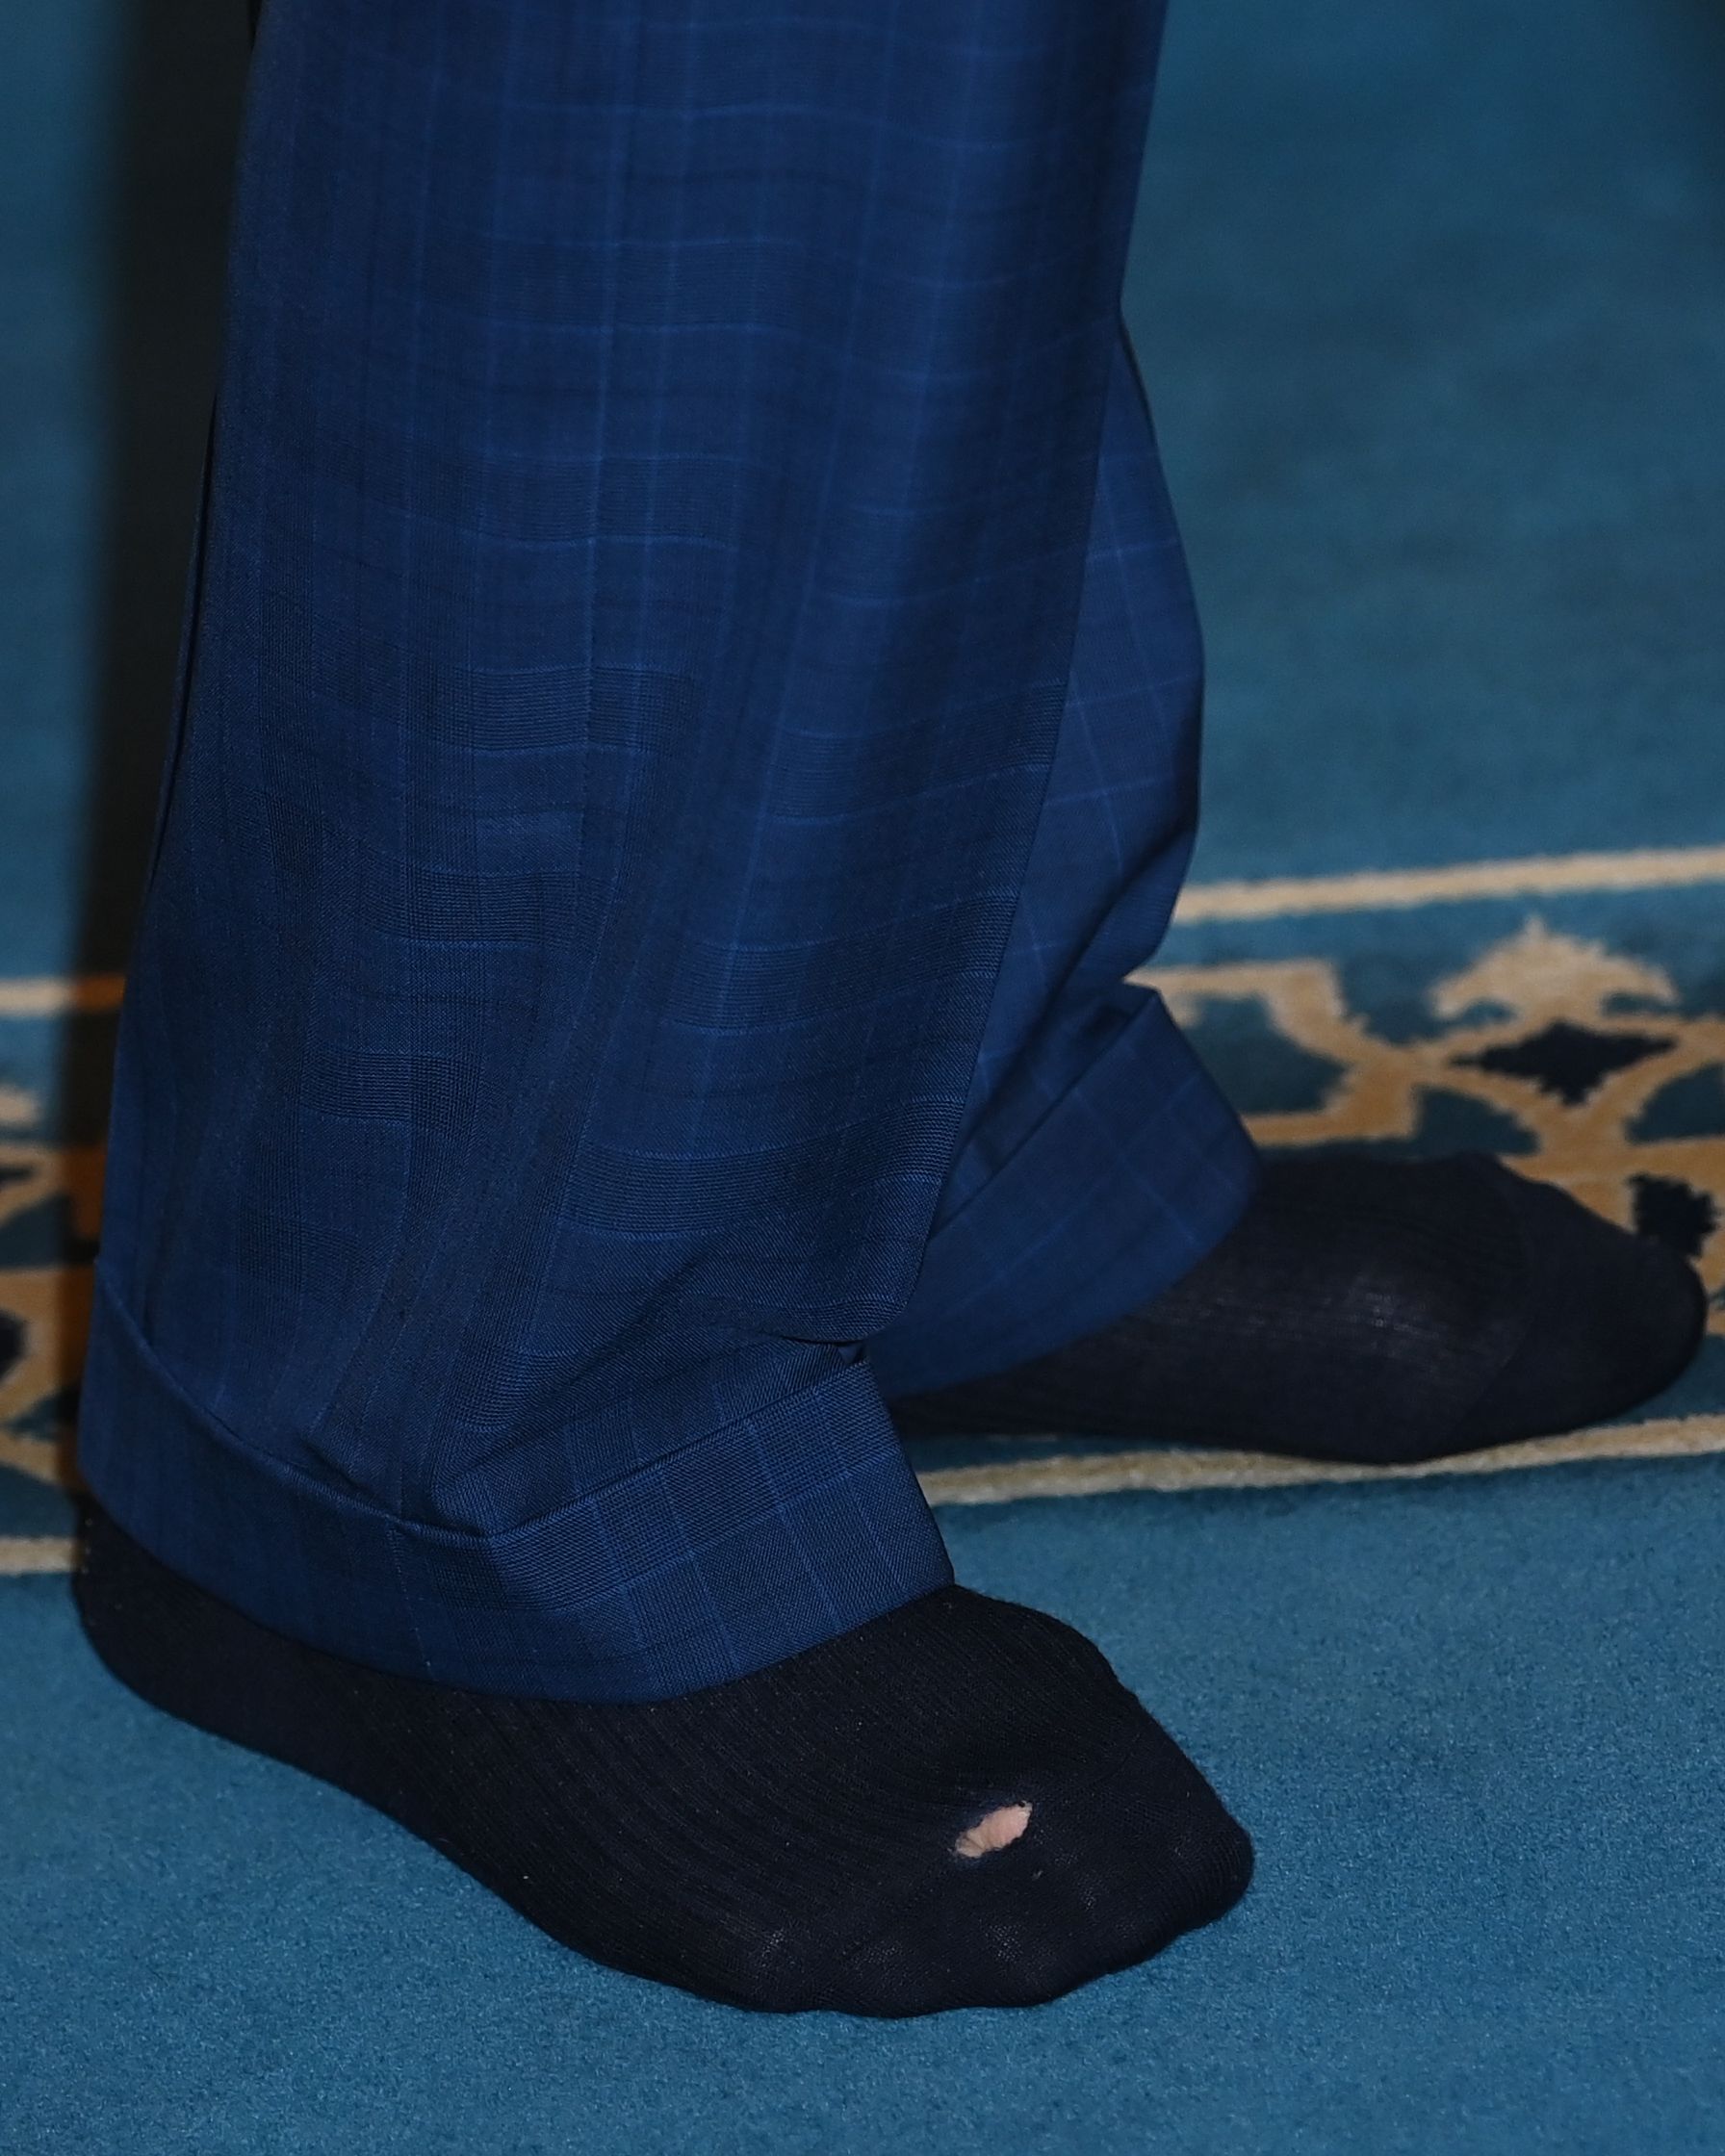 <p>King Charles III revealed a hole in his royal sock when he took off his shoes during a visit to the Brick Lane Mosque in London on Feb. 8, 2023.</p>